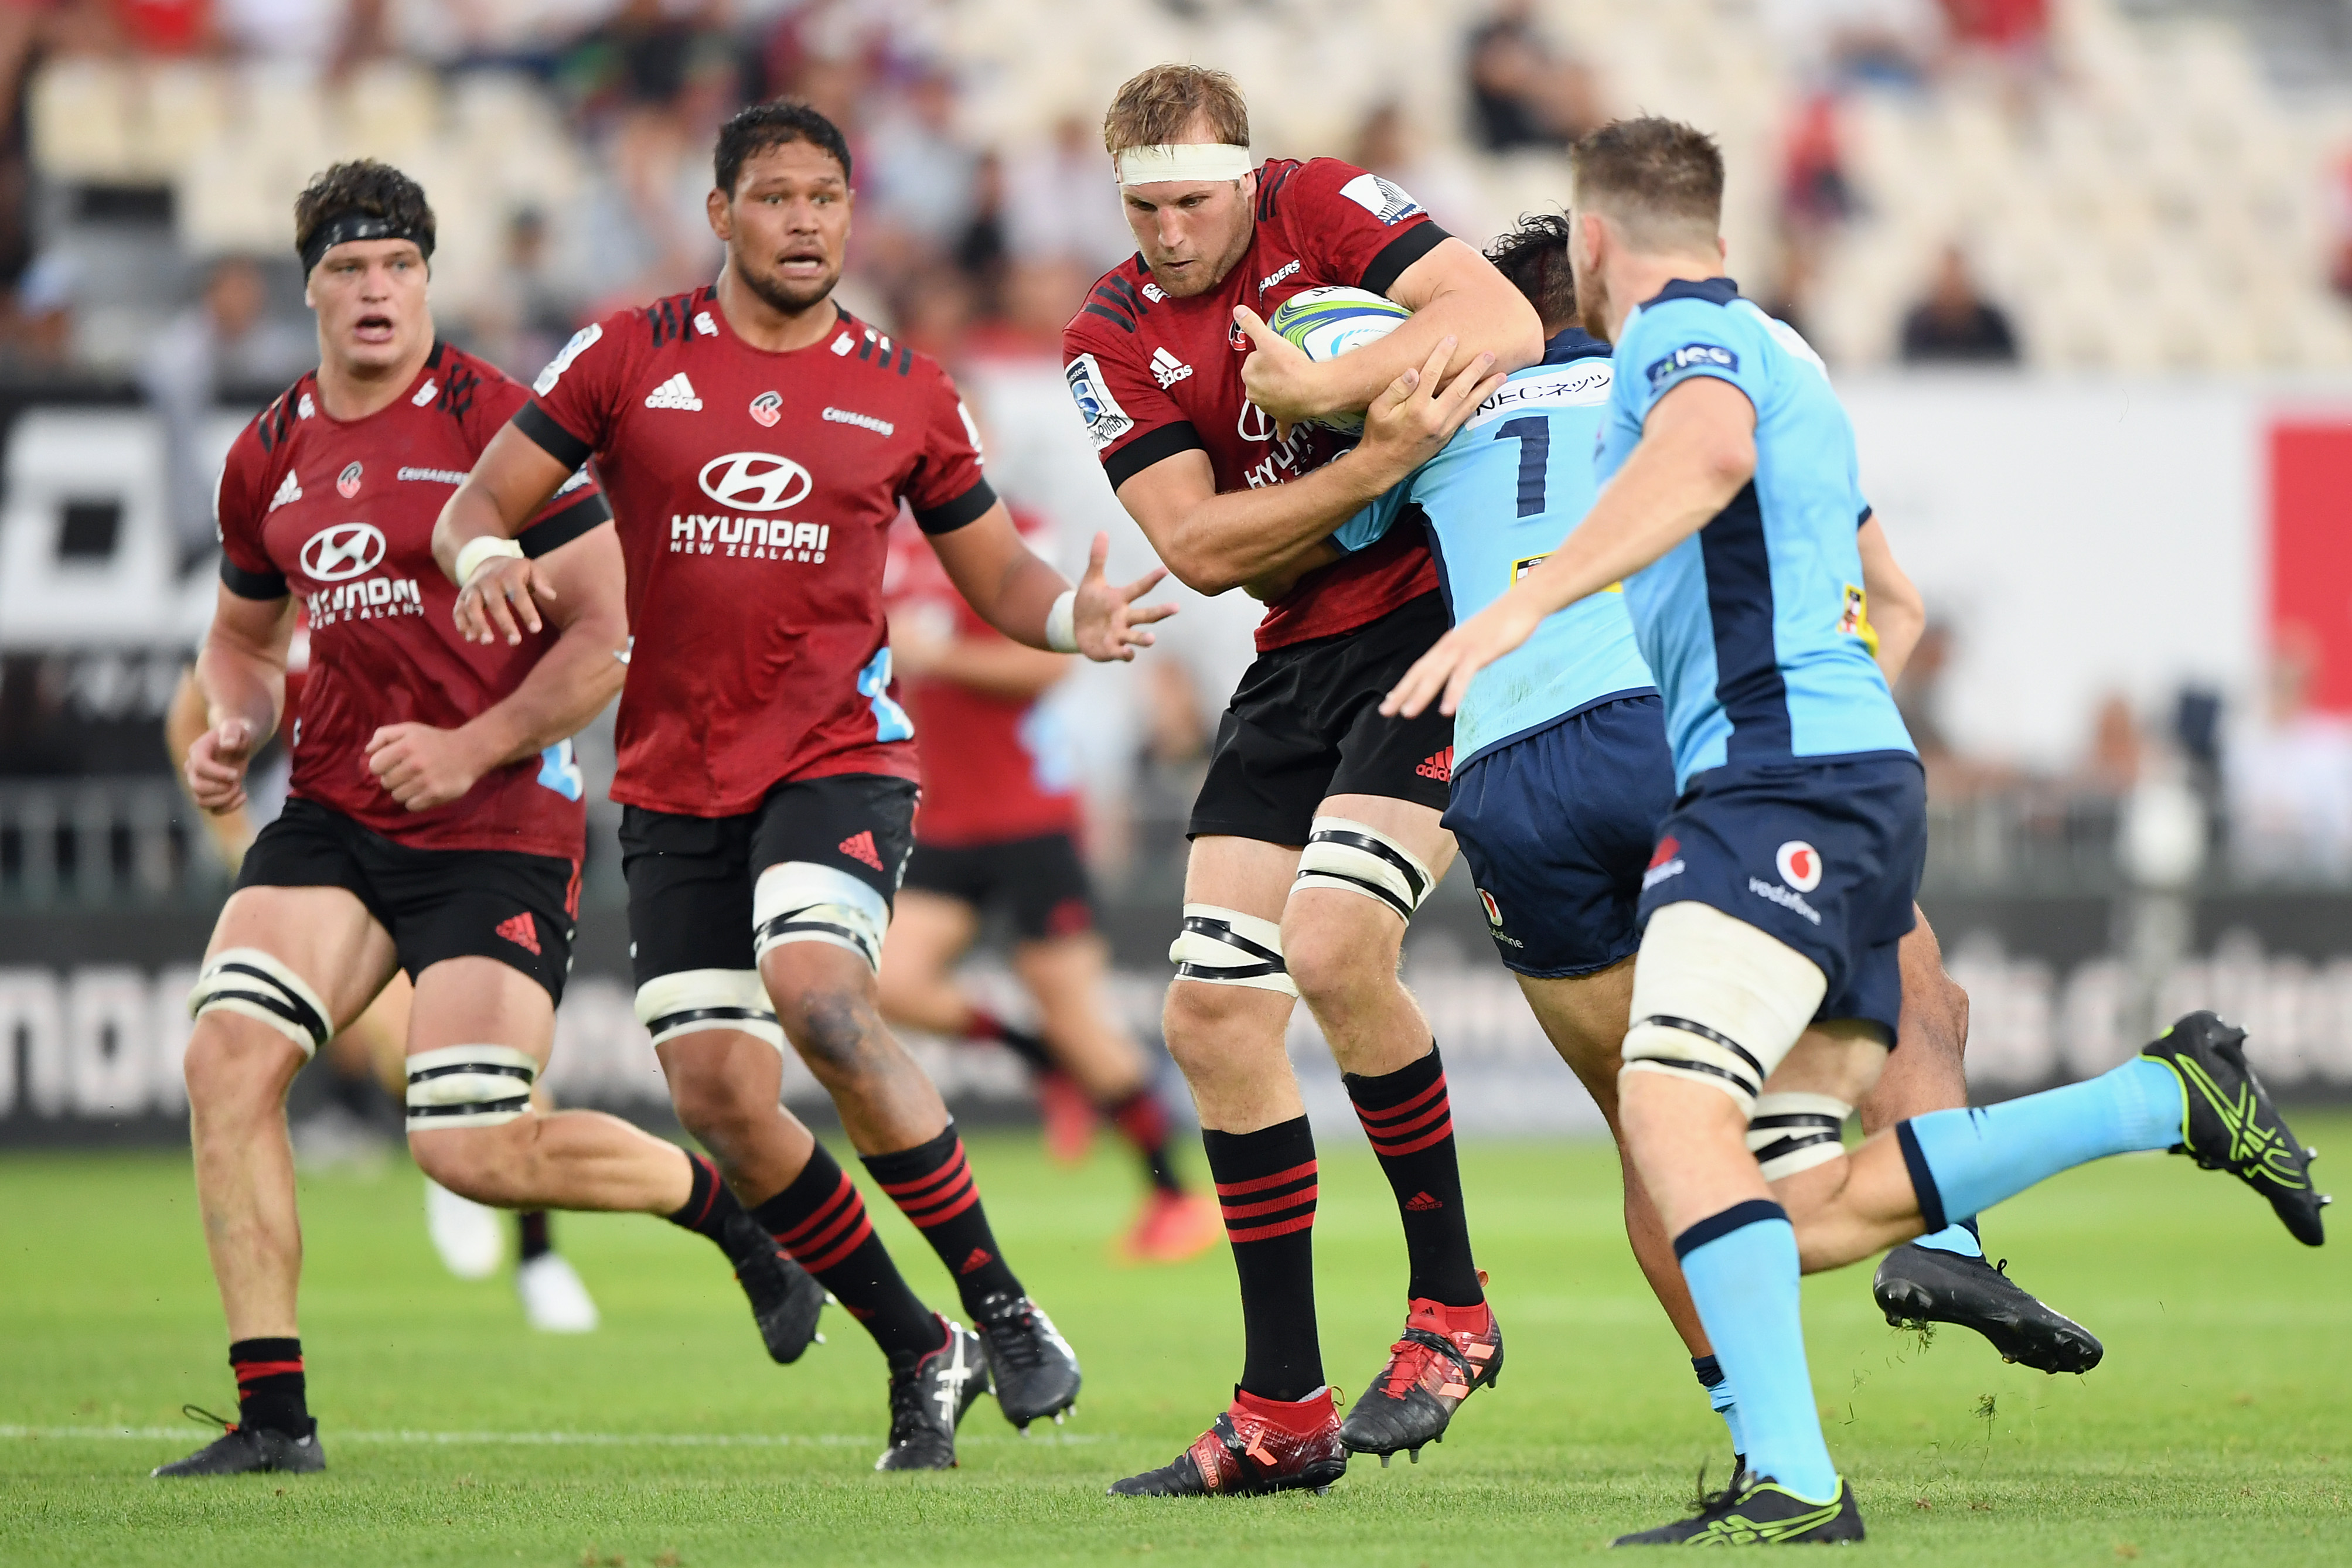 Super Rugby NZ - It just HAD to be! The Crusaders are the